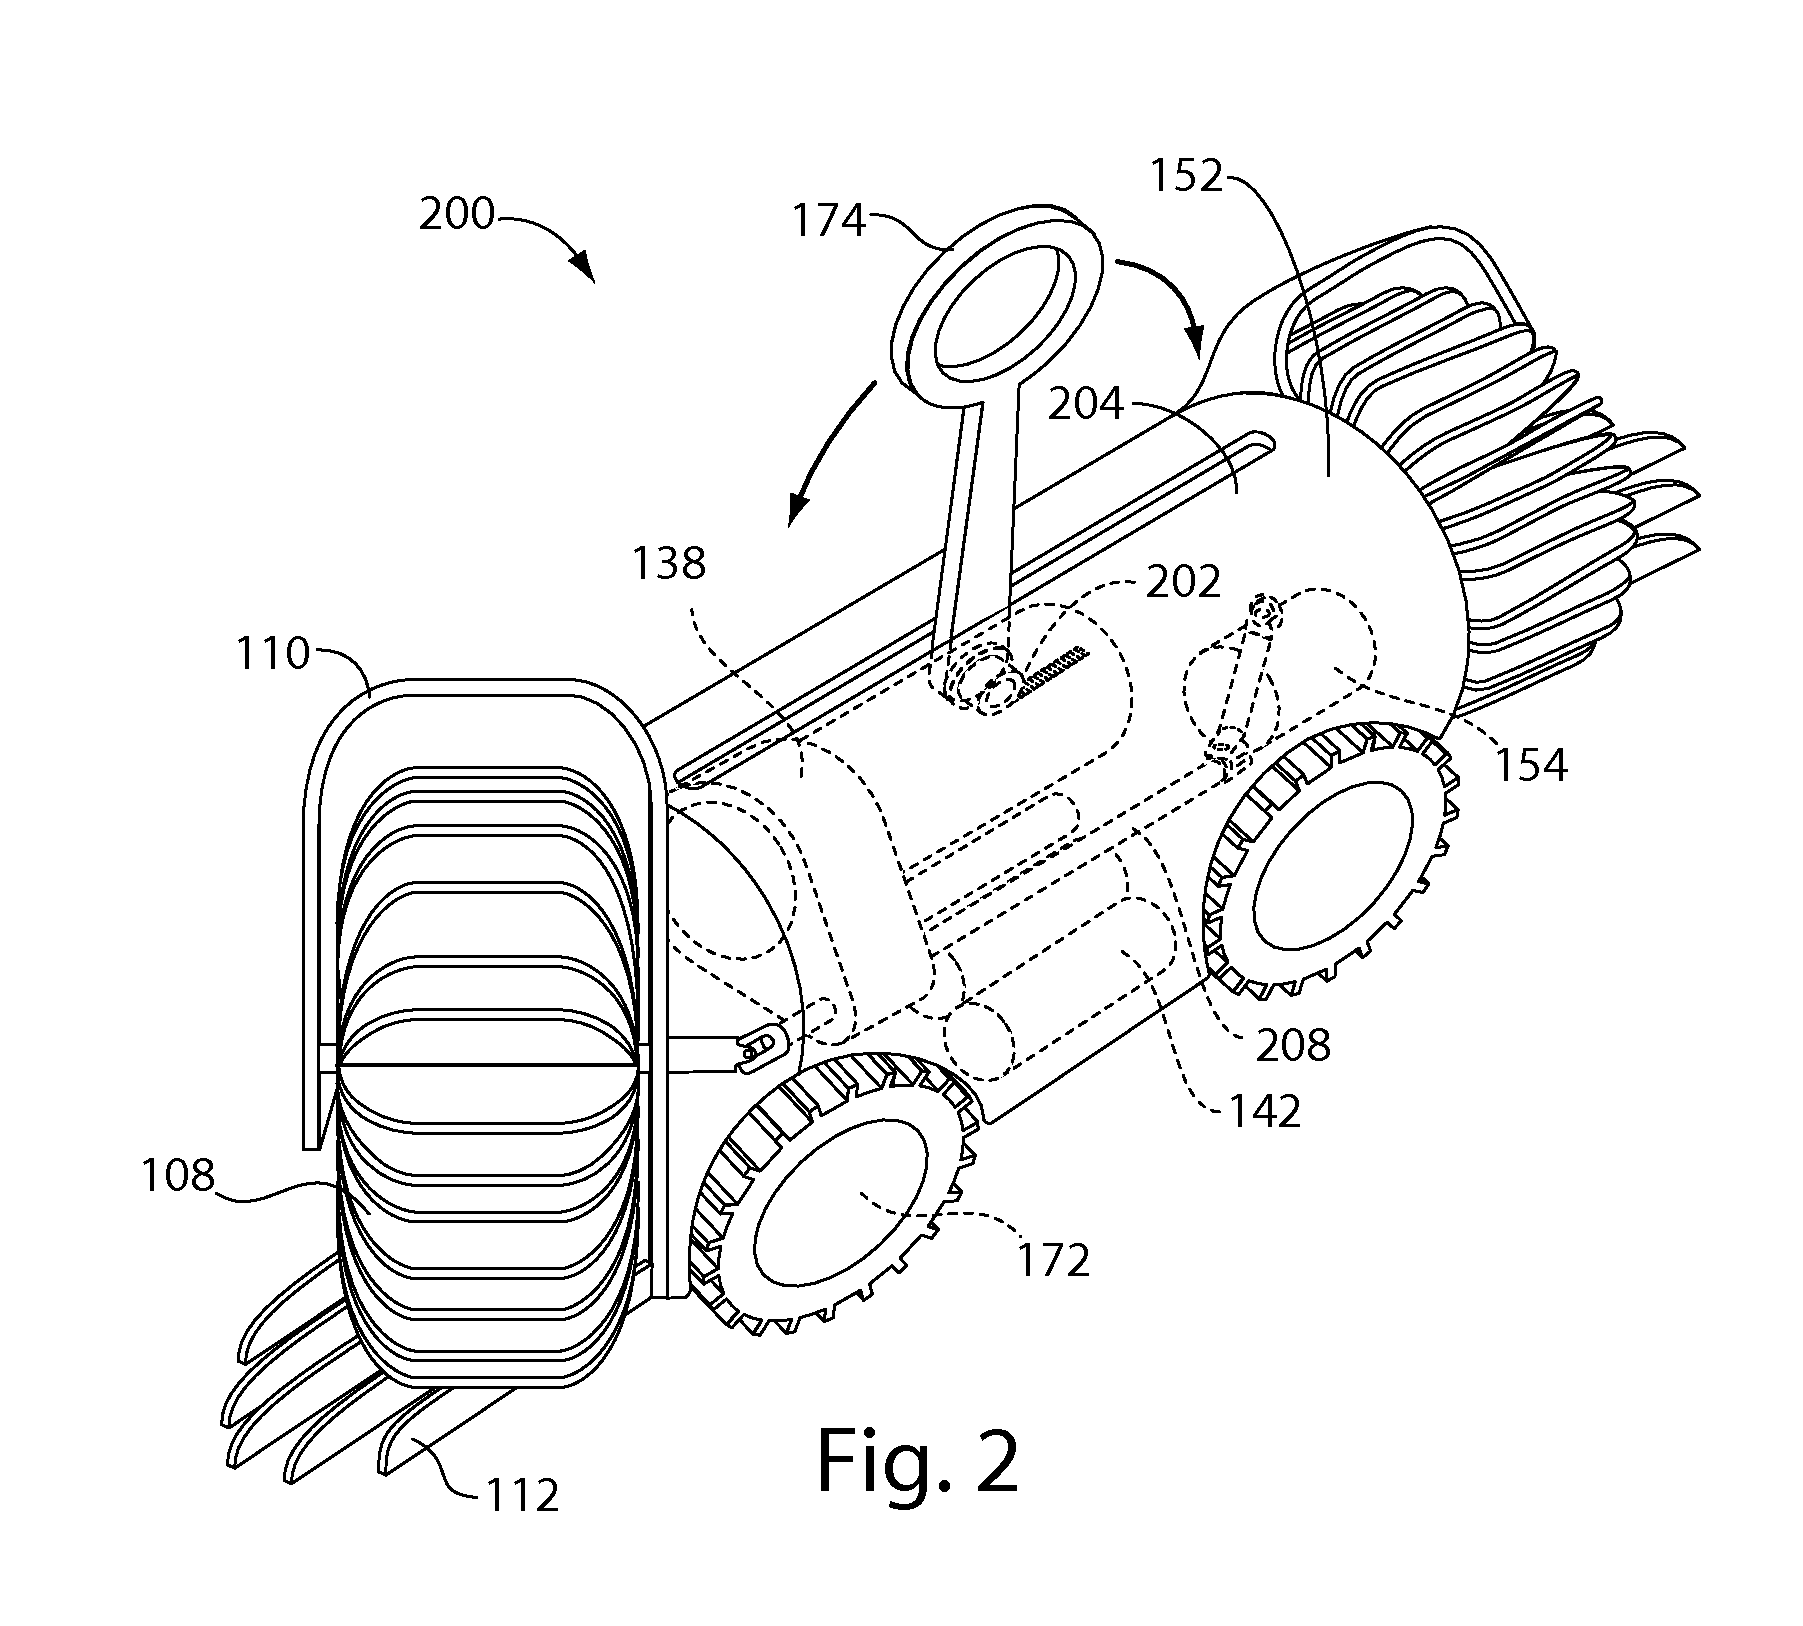 Systems and methods for robotic gutter cleaning along an axis of rotation